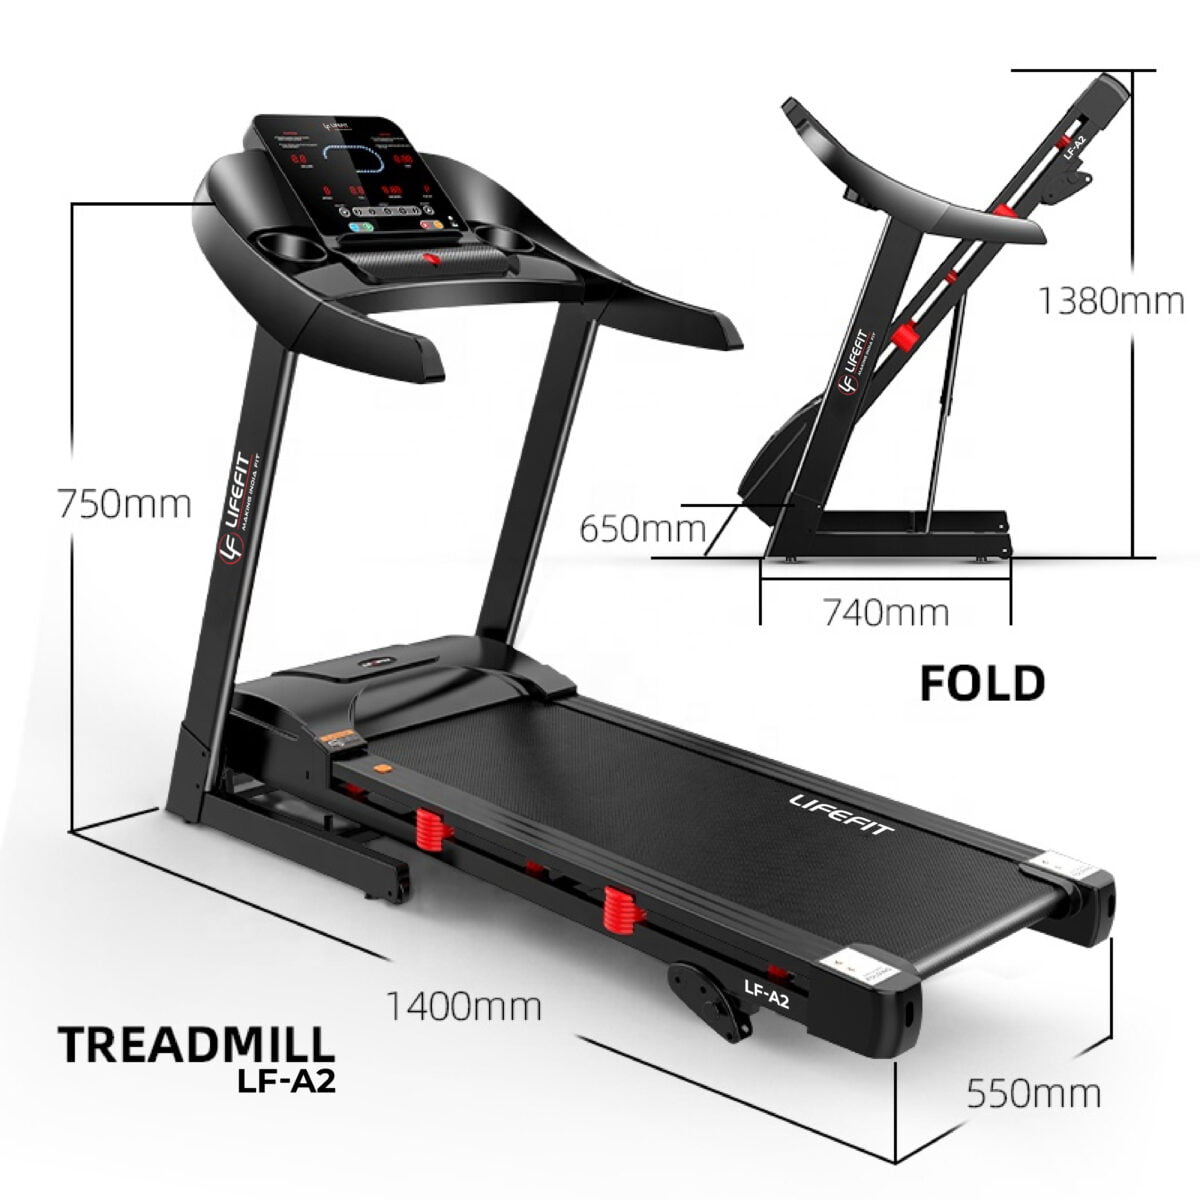 Life Fit A2 Treadmill Folding Features